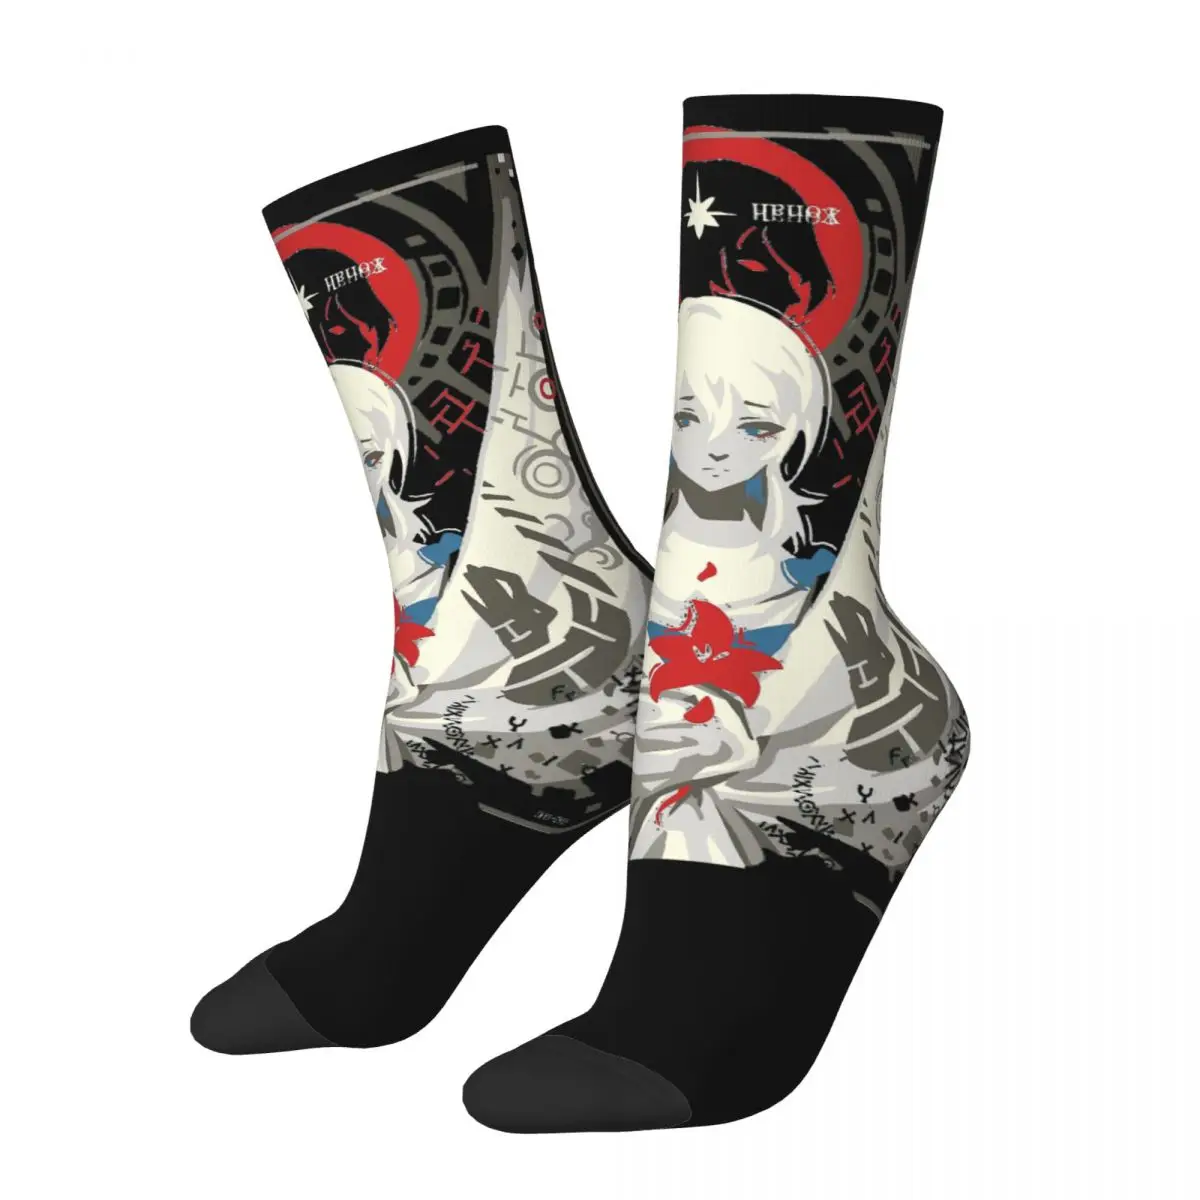 

Funny Happy Men's compression Socks Yonah Vintage Harajuku NieR Replicant Steam RPG Game Street Style Casual Crew Crazy Sock